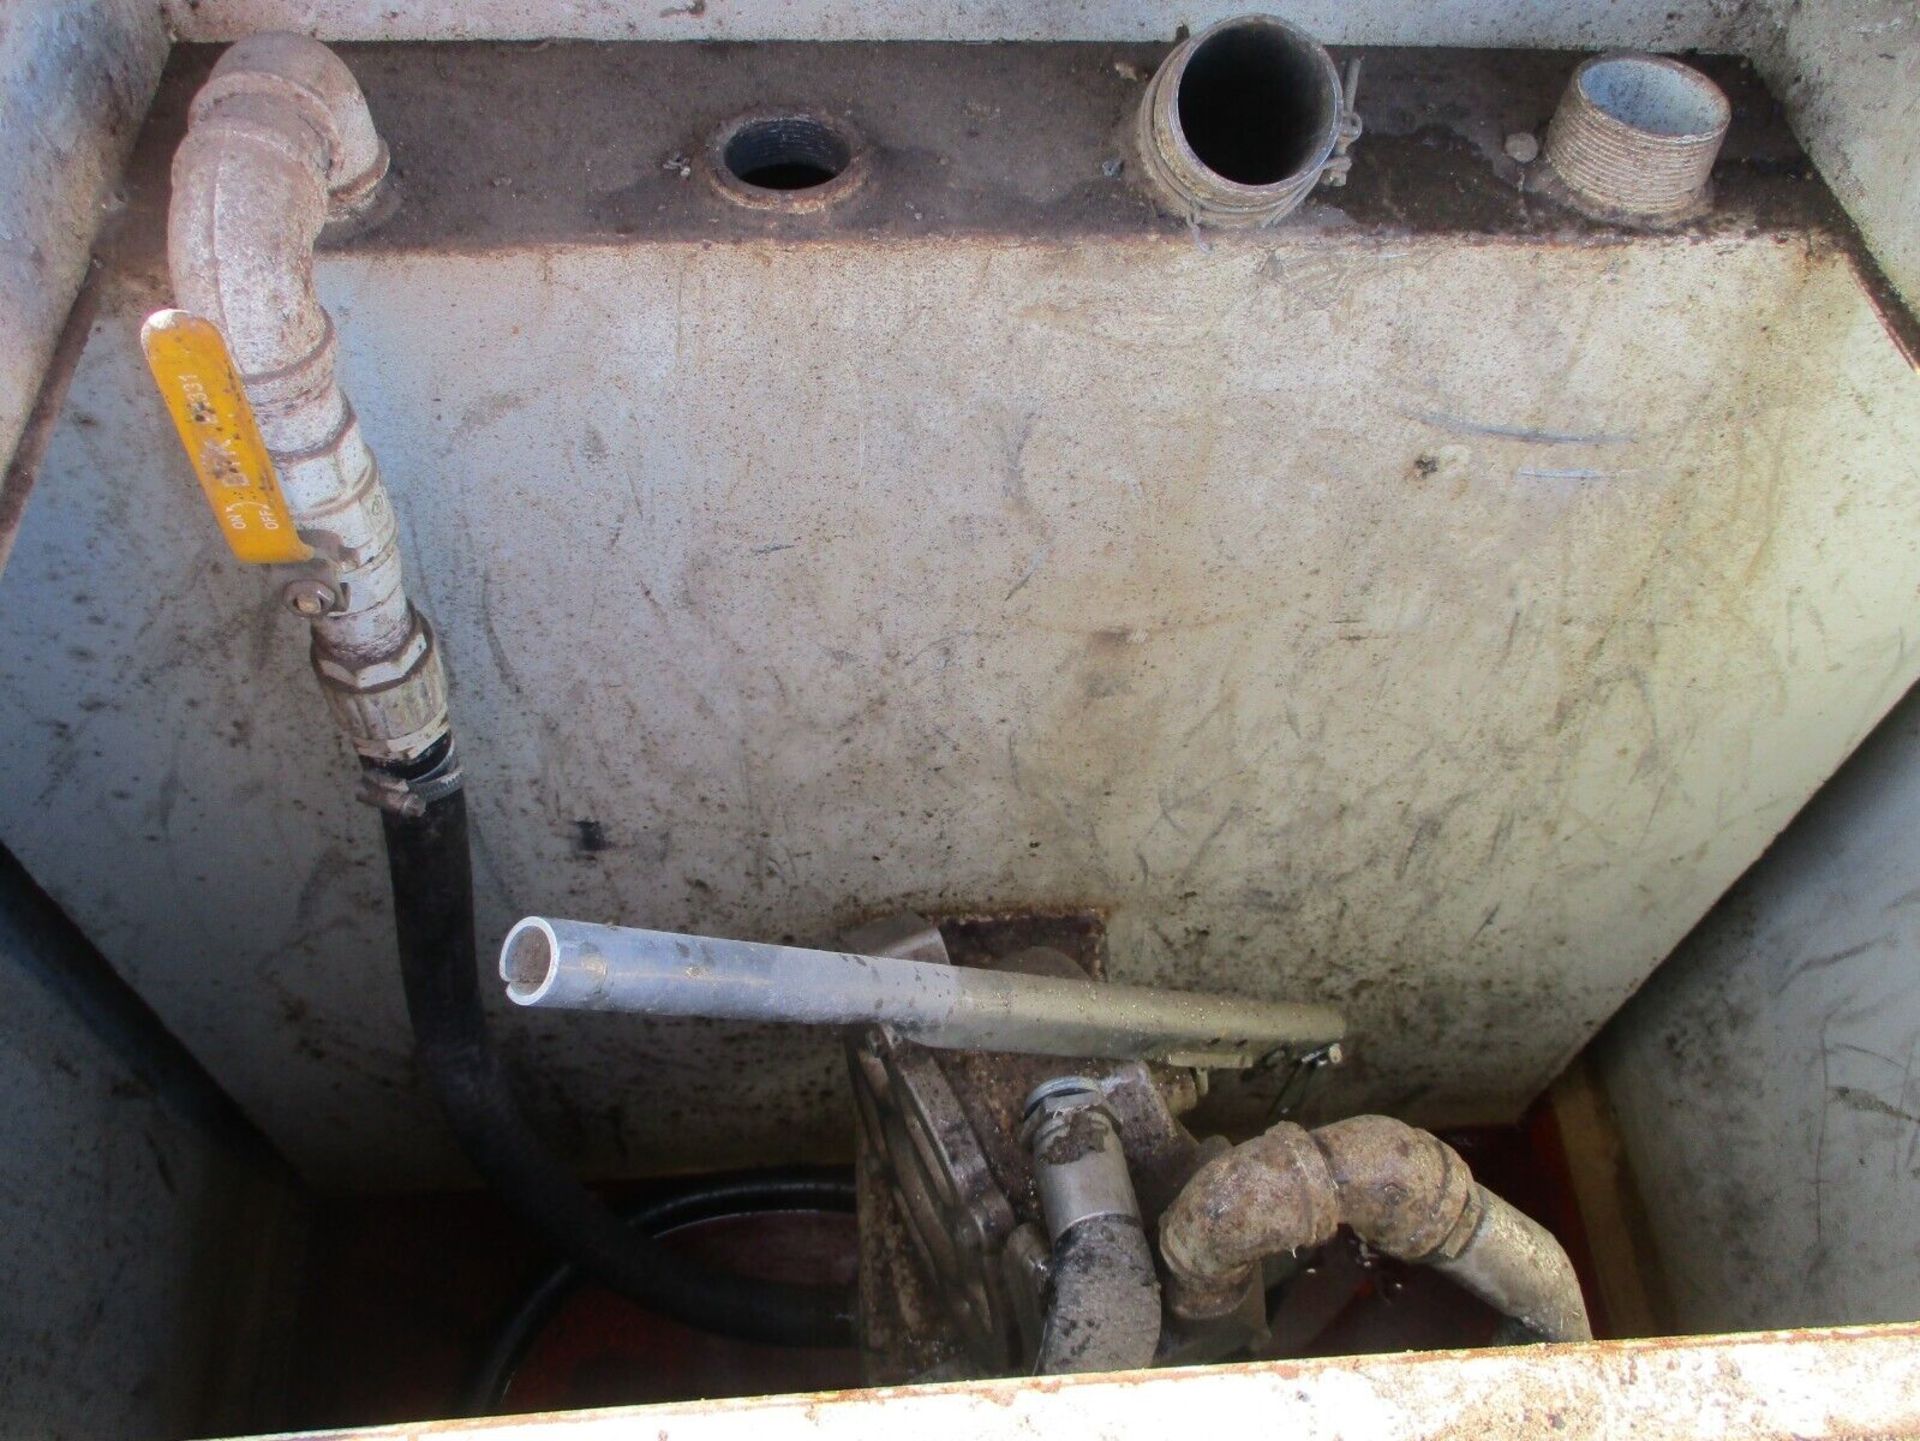 WITH HAND PUMP 1000 LITRE BUNDED FUEL TANK - Image 5 of 6